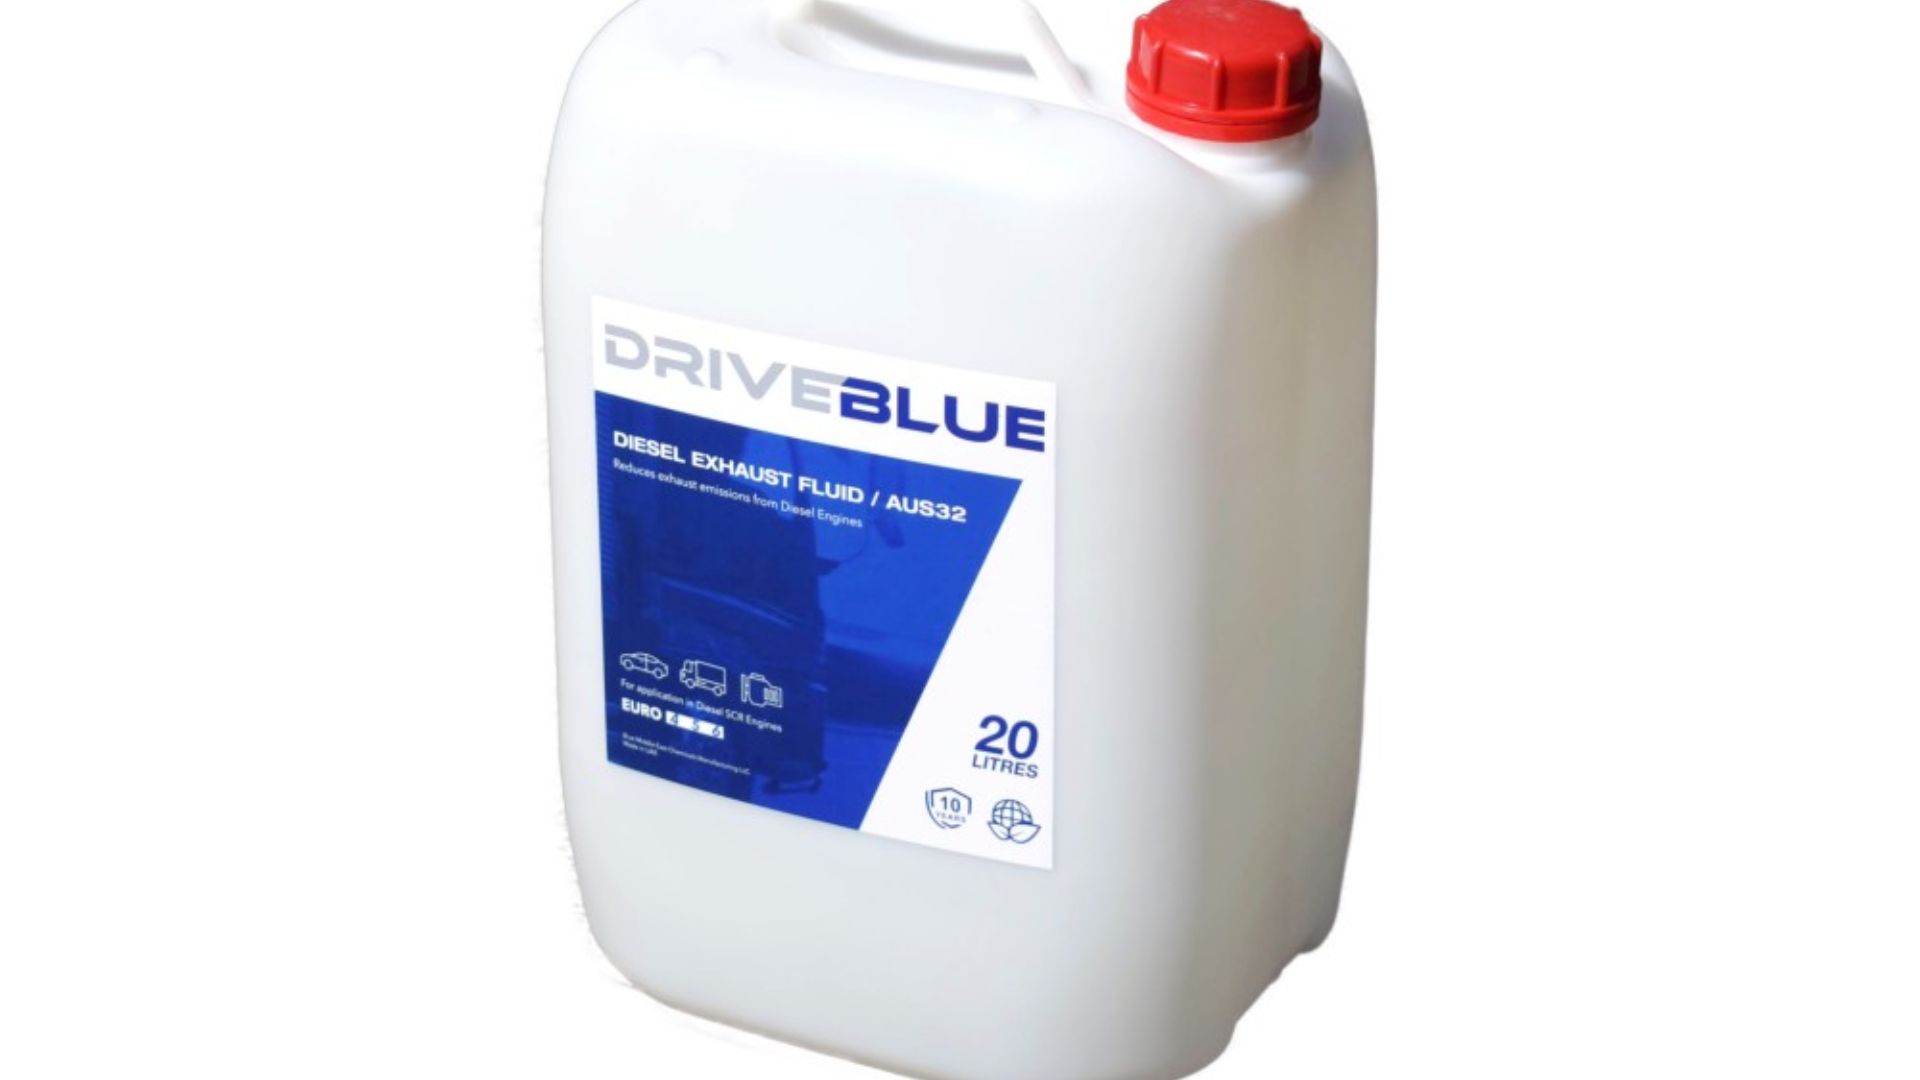  How Does Drive Blue Diesel Exhaust Fluid Keep Your Engine Running Smoothly